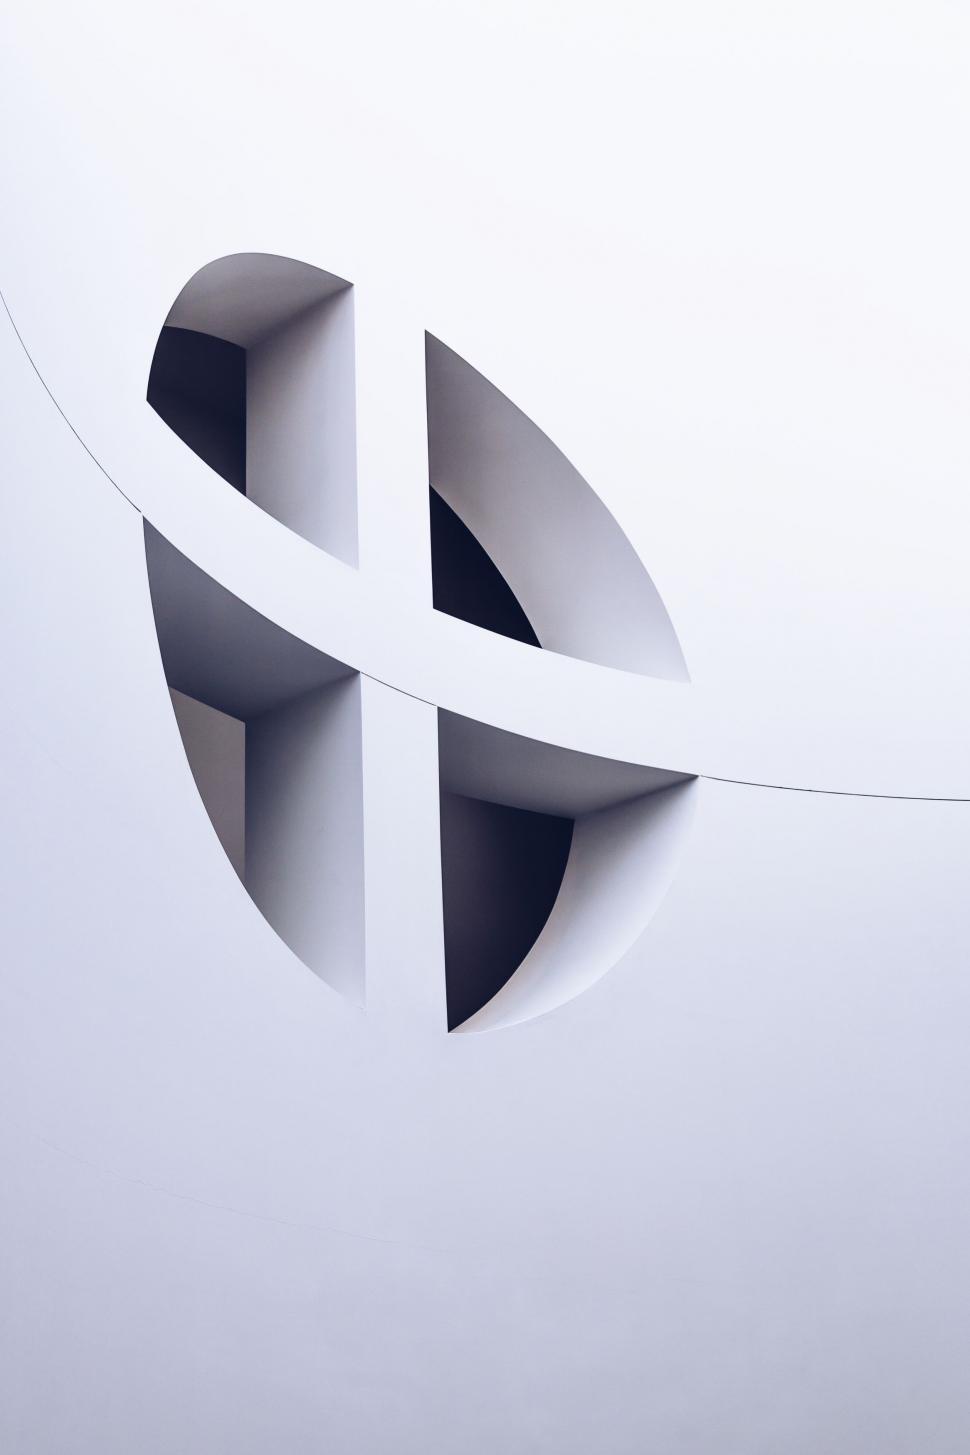 Free Image of White Object Resembling a Cross 